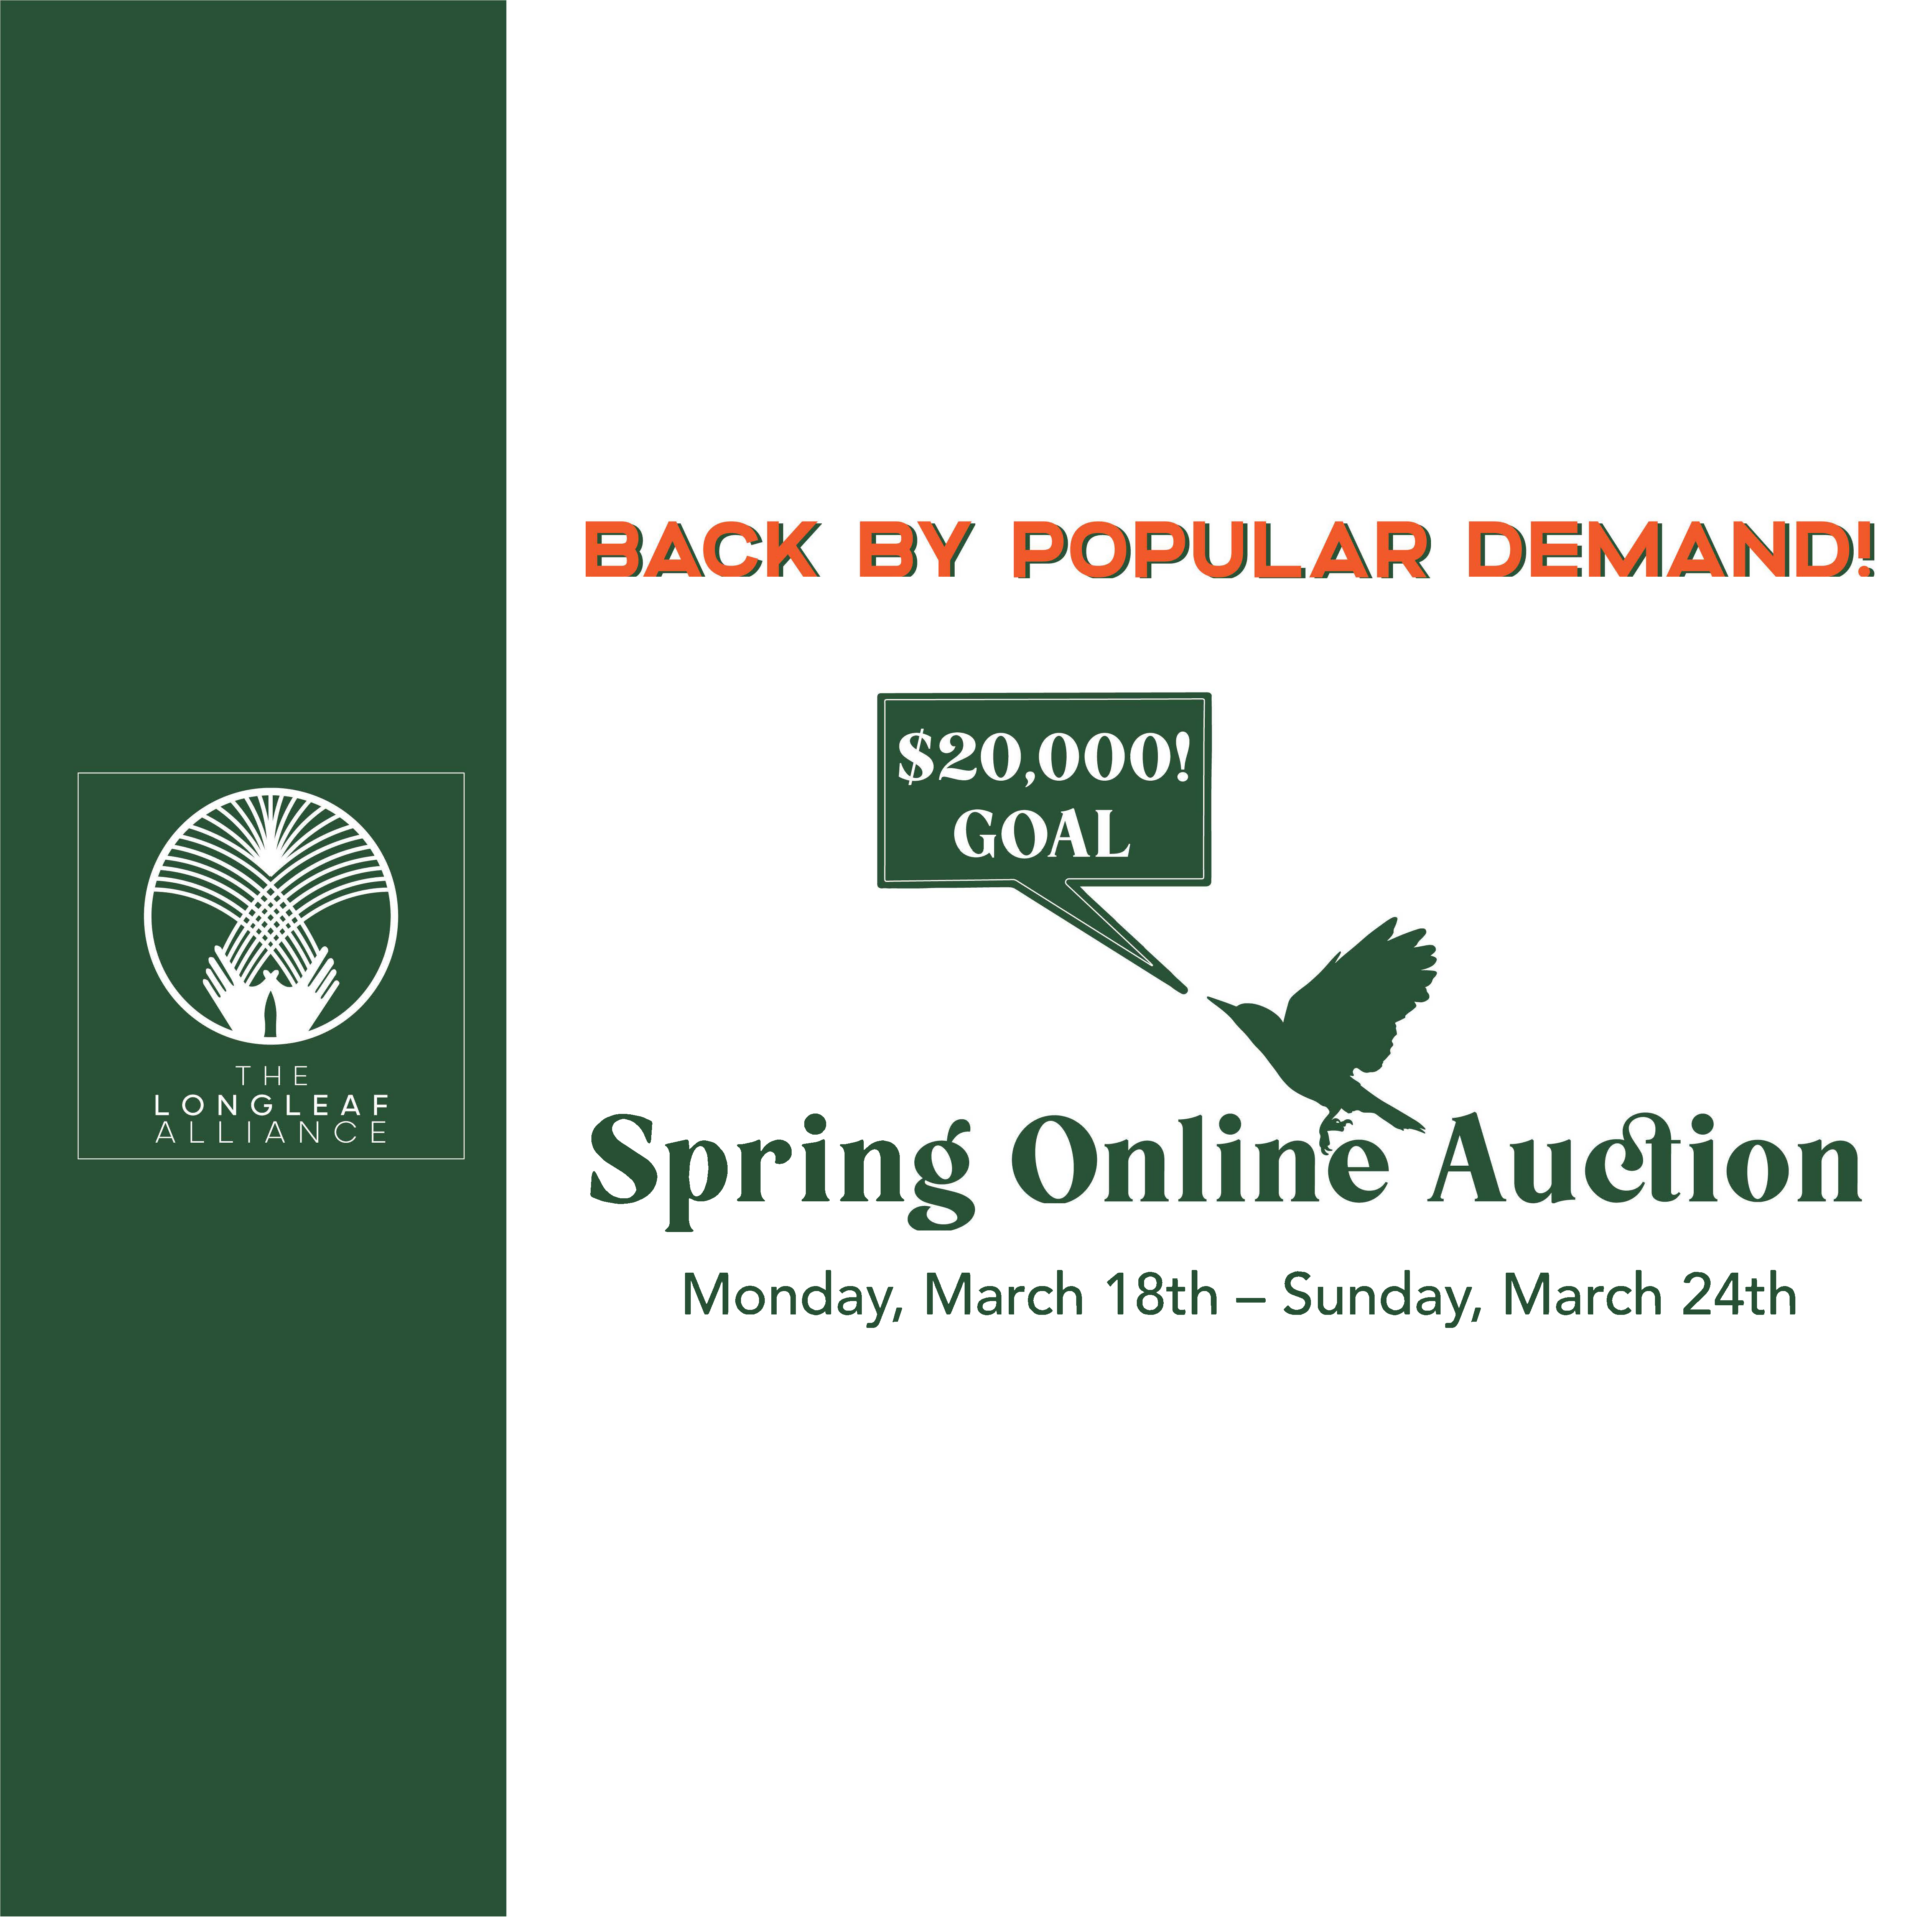 Our Spring Auction begins Monday, March 18 at 8:00am ET and concludes on Sunday, March 24 at 8:00pm ET.